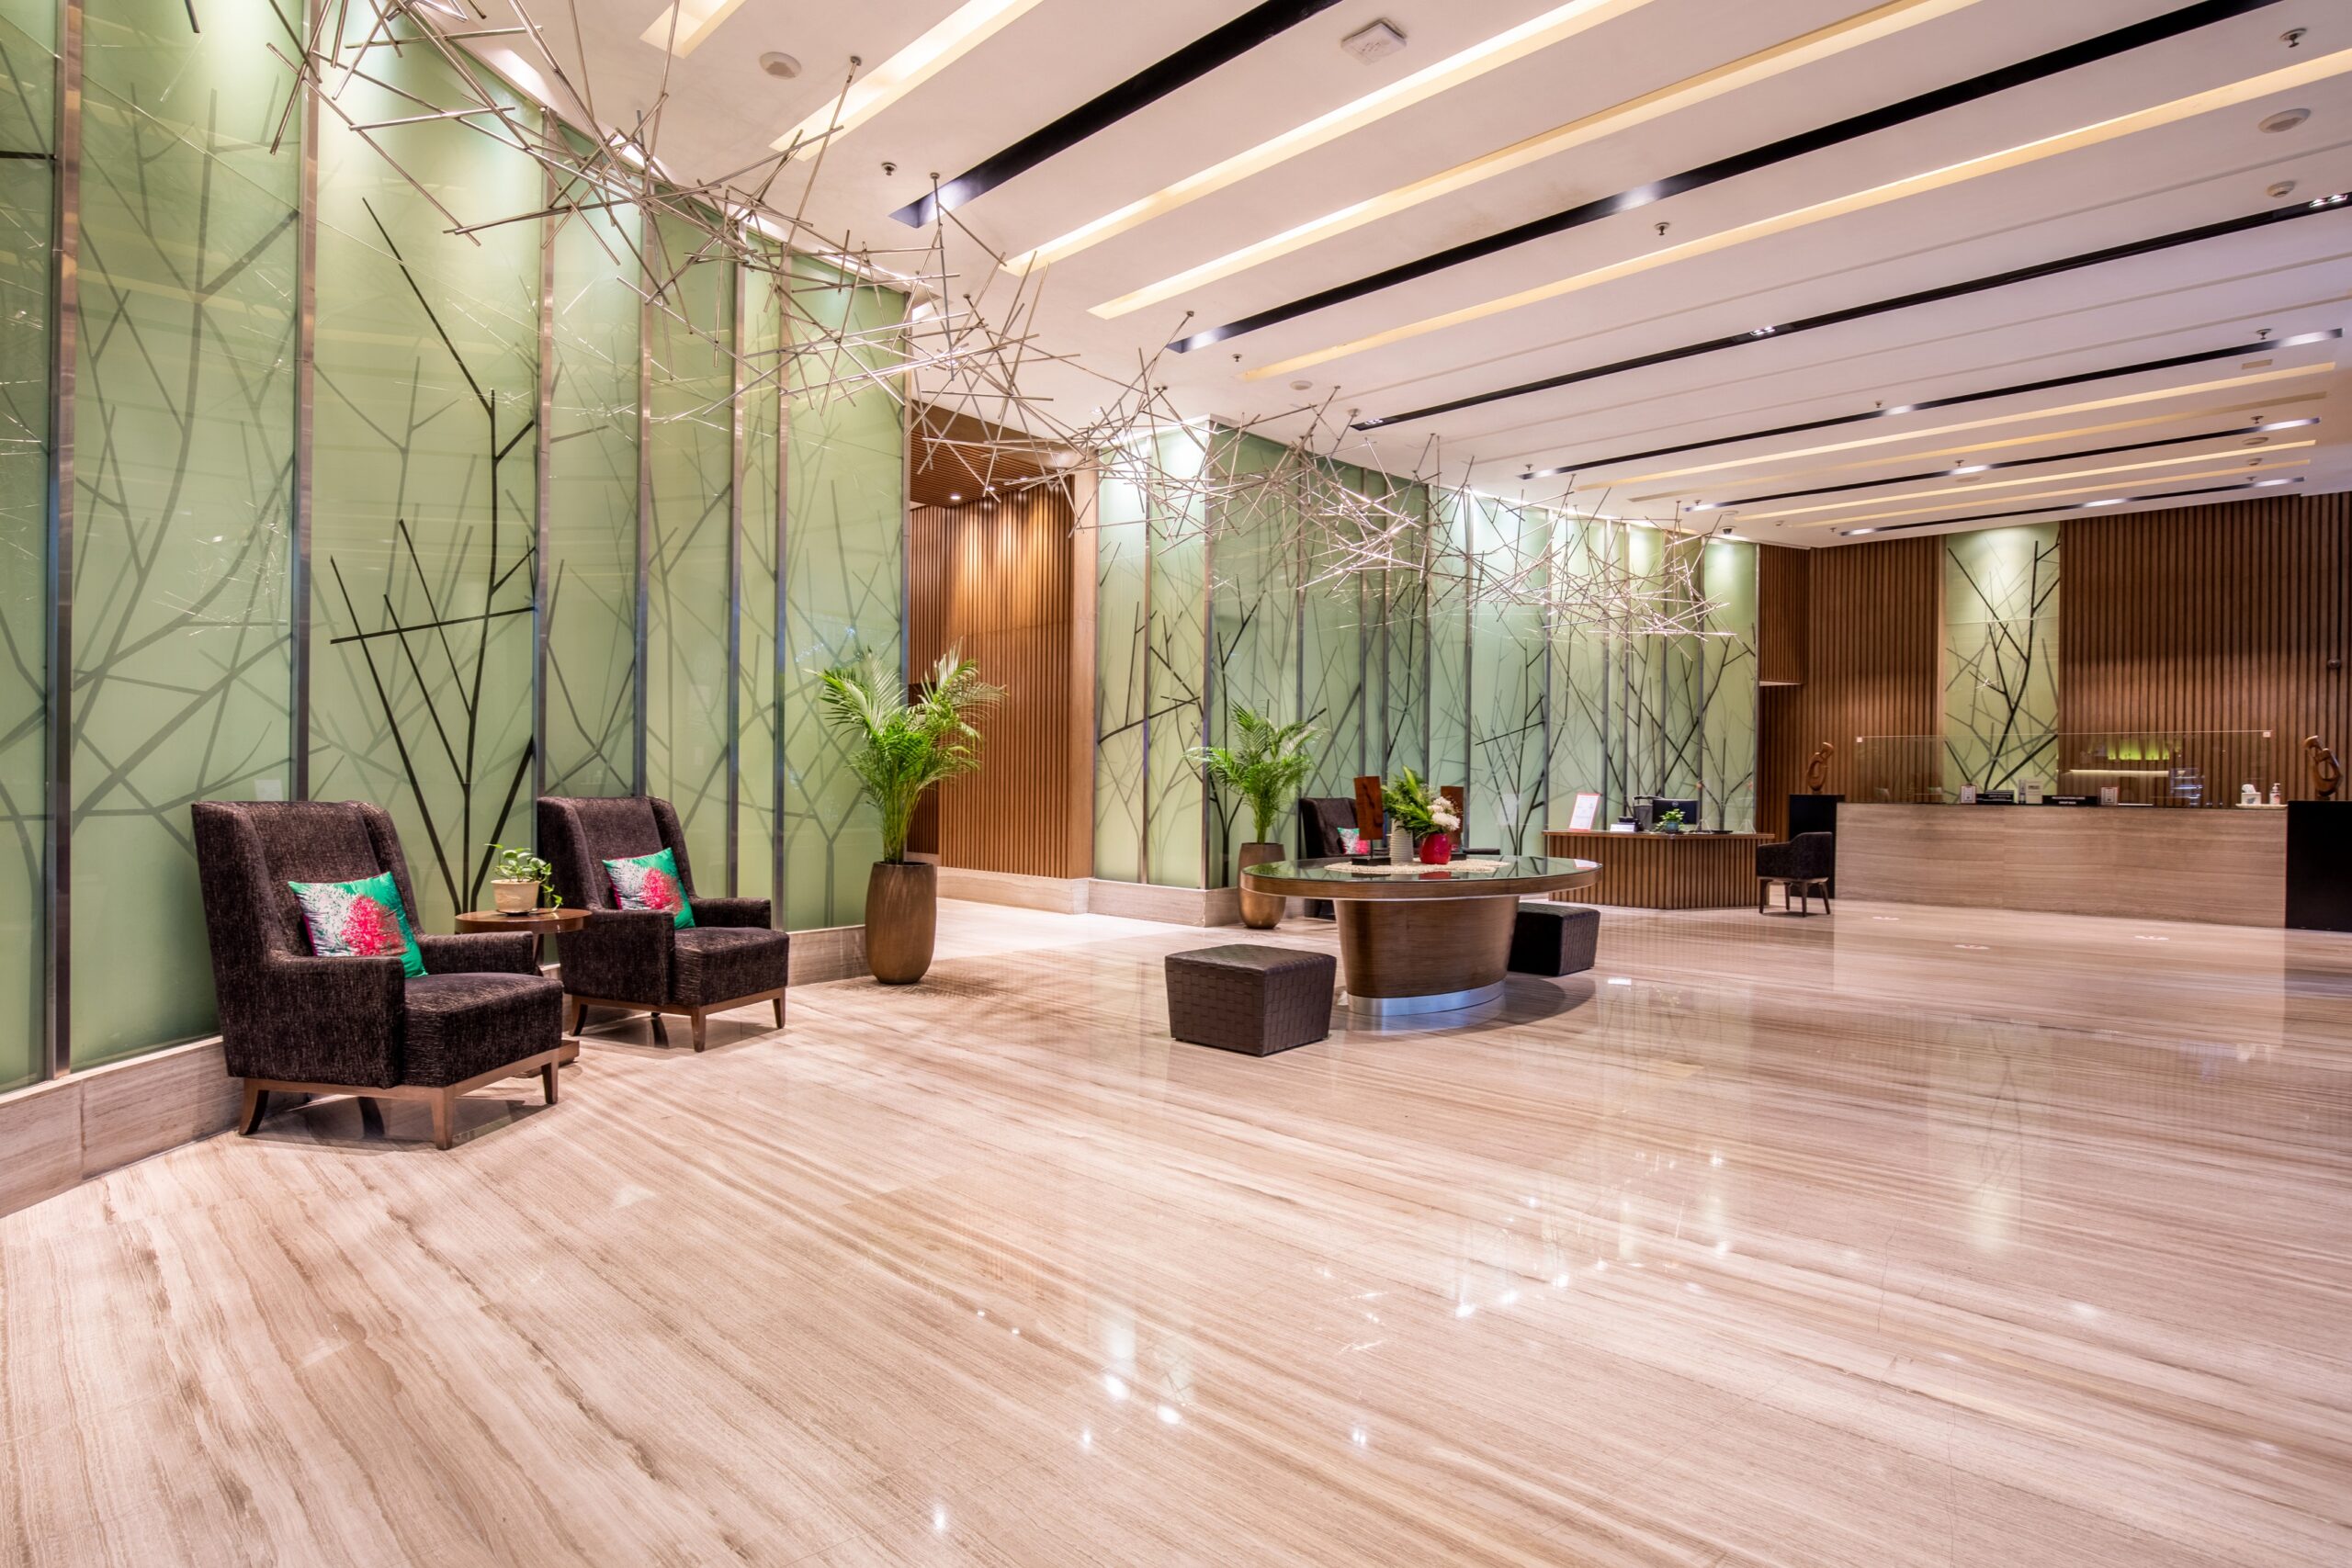 Welcomhotel by ITC Hotels, Bengaluru accredited the LEED Zero Carbon Certification by USGBC